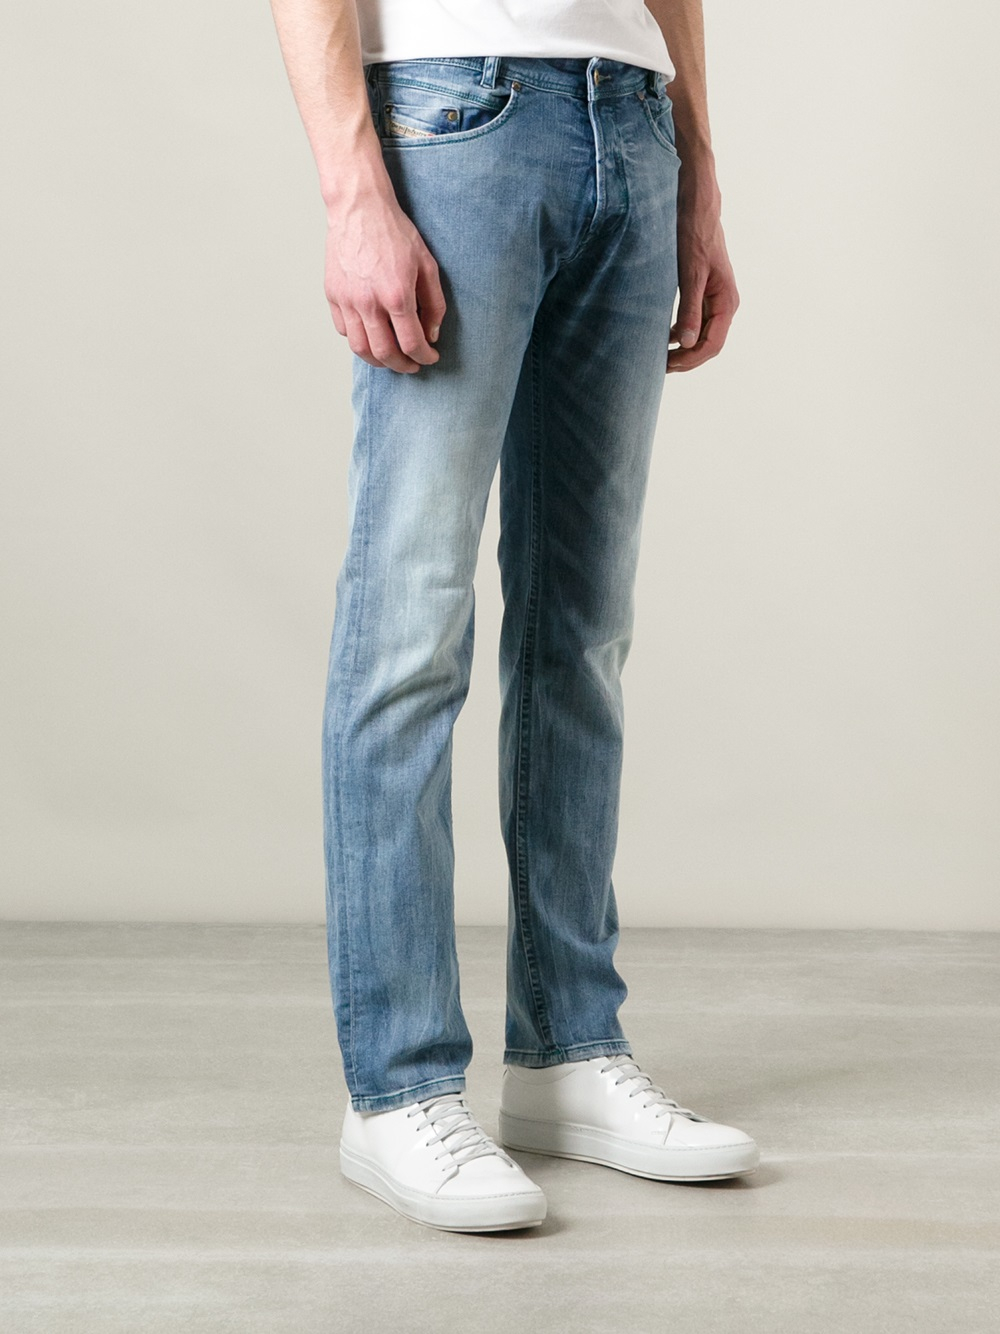 Lyst - Diesel Stone Washed Jeans in Blue for Men